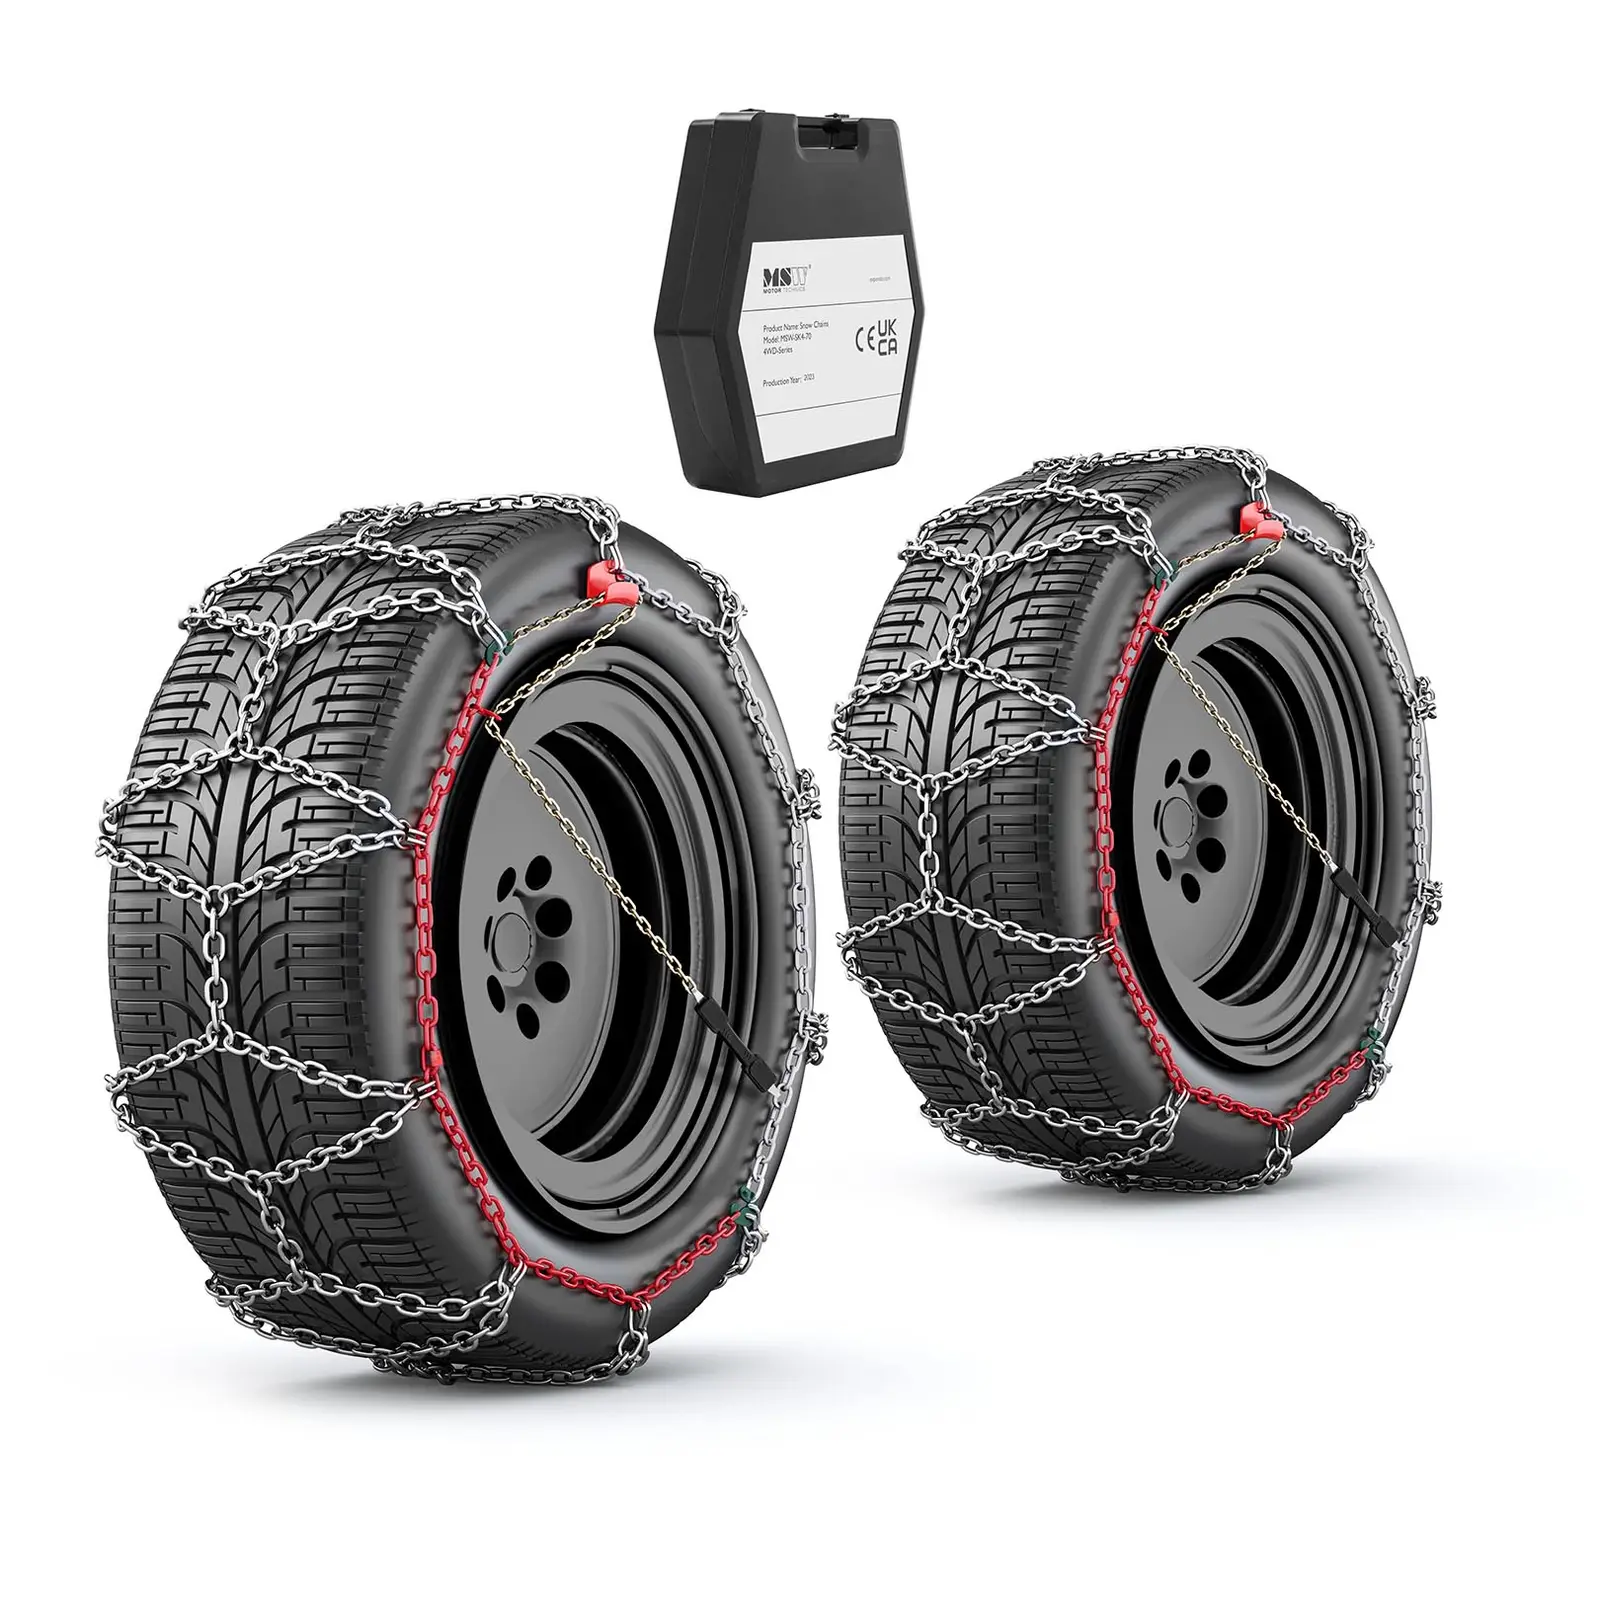 Snow Chains - 4WD (4x4) - 16 mm - EN 16662-1 - for tire sizes: 9×15 / 245/65 r17 / 255/50 r19 and others